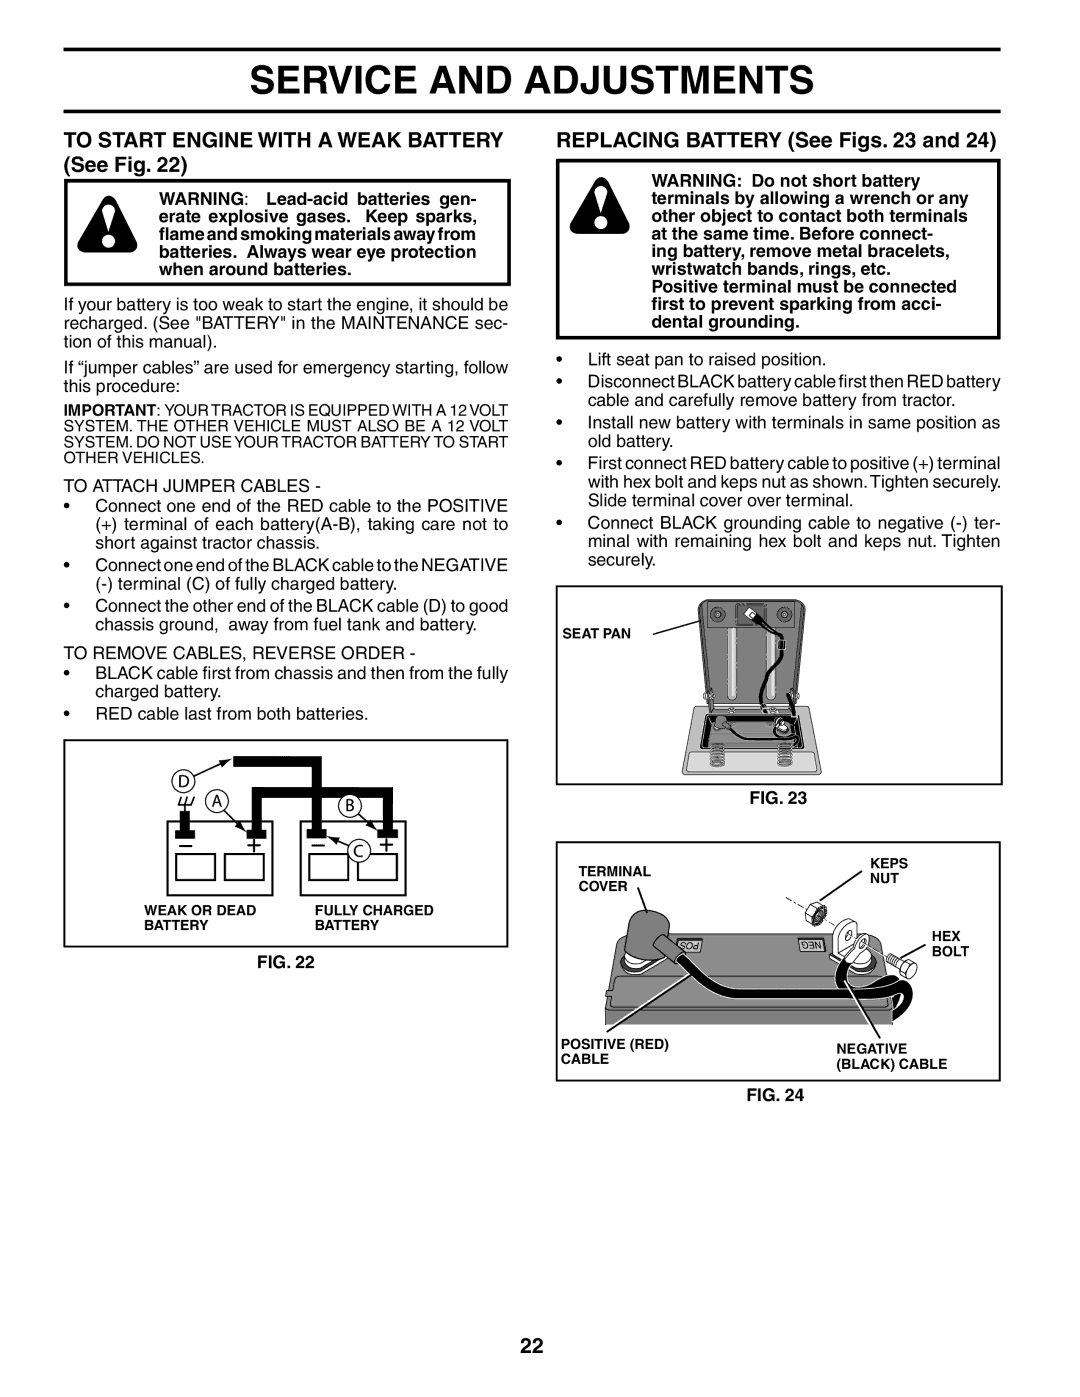 Poulan PO13T38A manual To Start Engine with a Weak Battery See Fig, Replacing Battery See Figs 